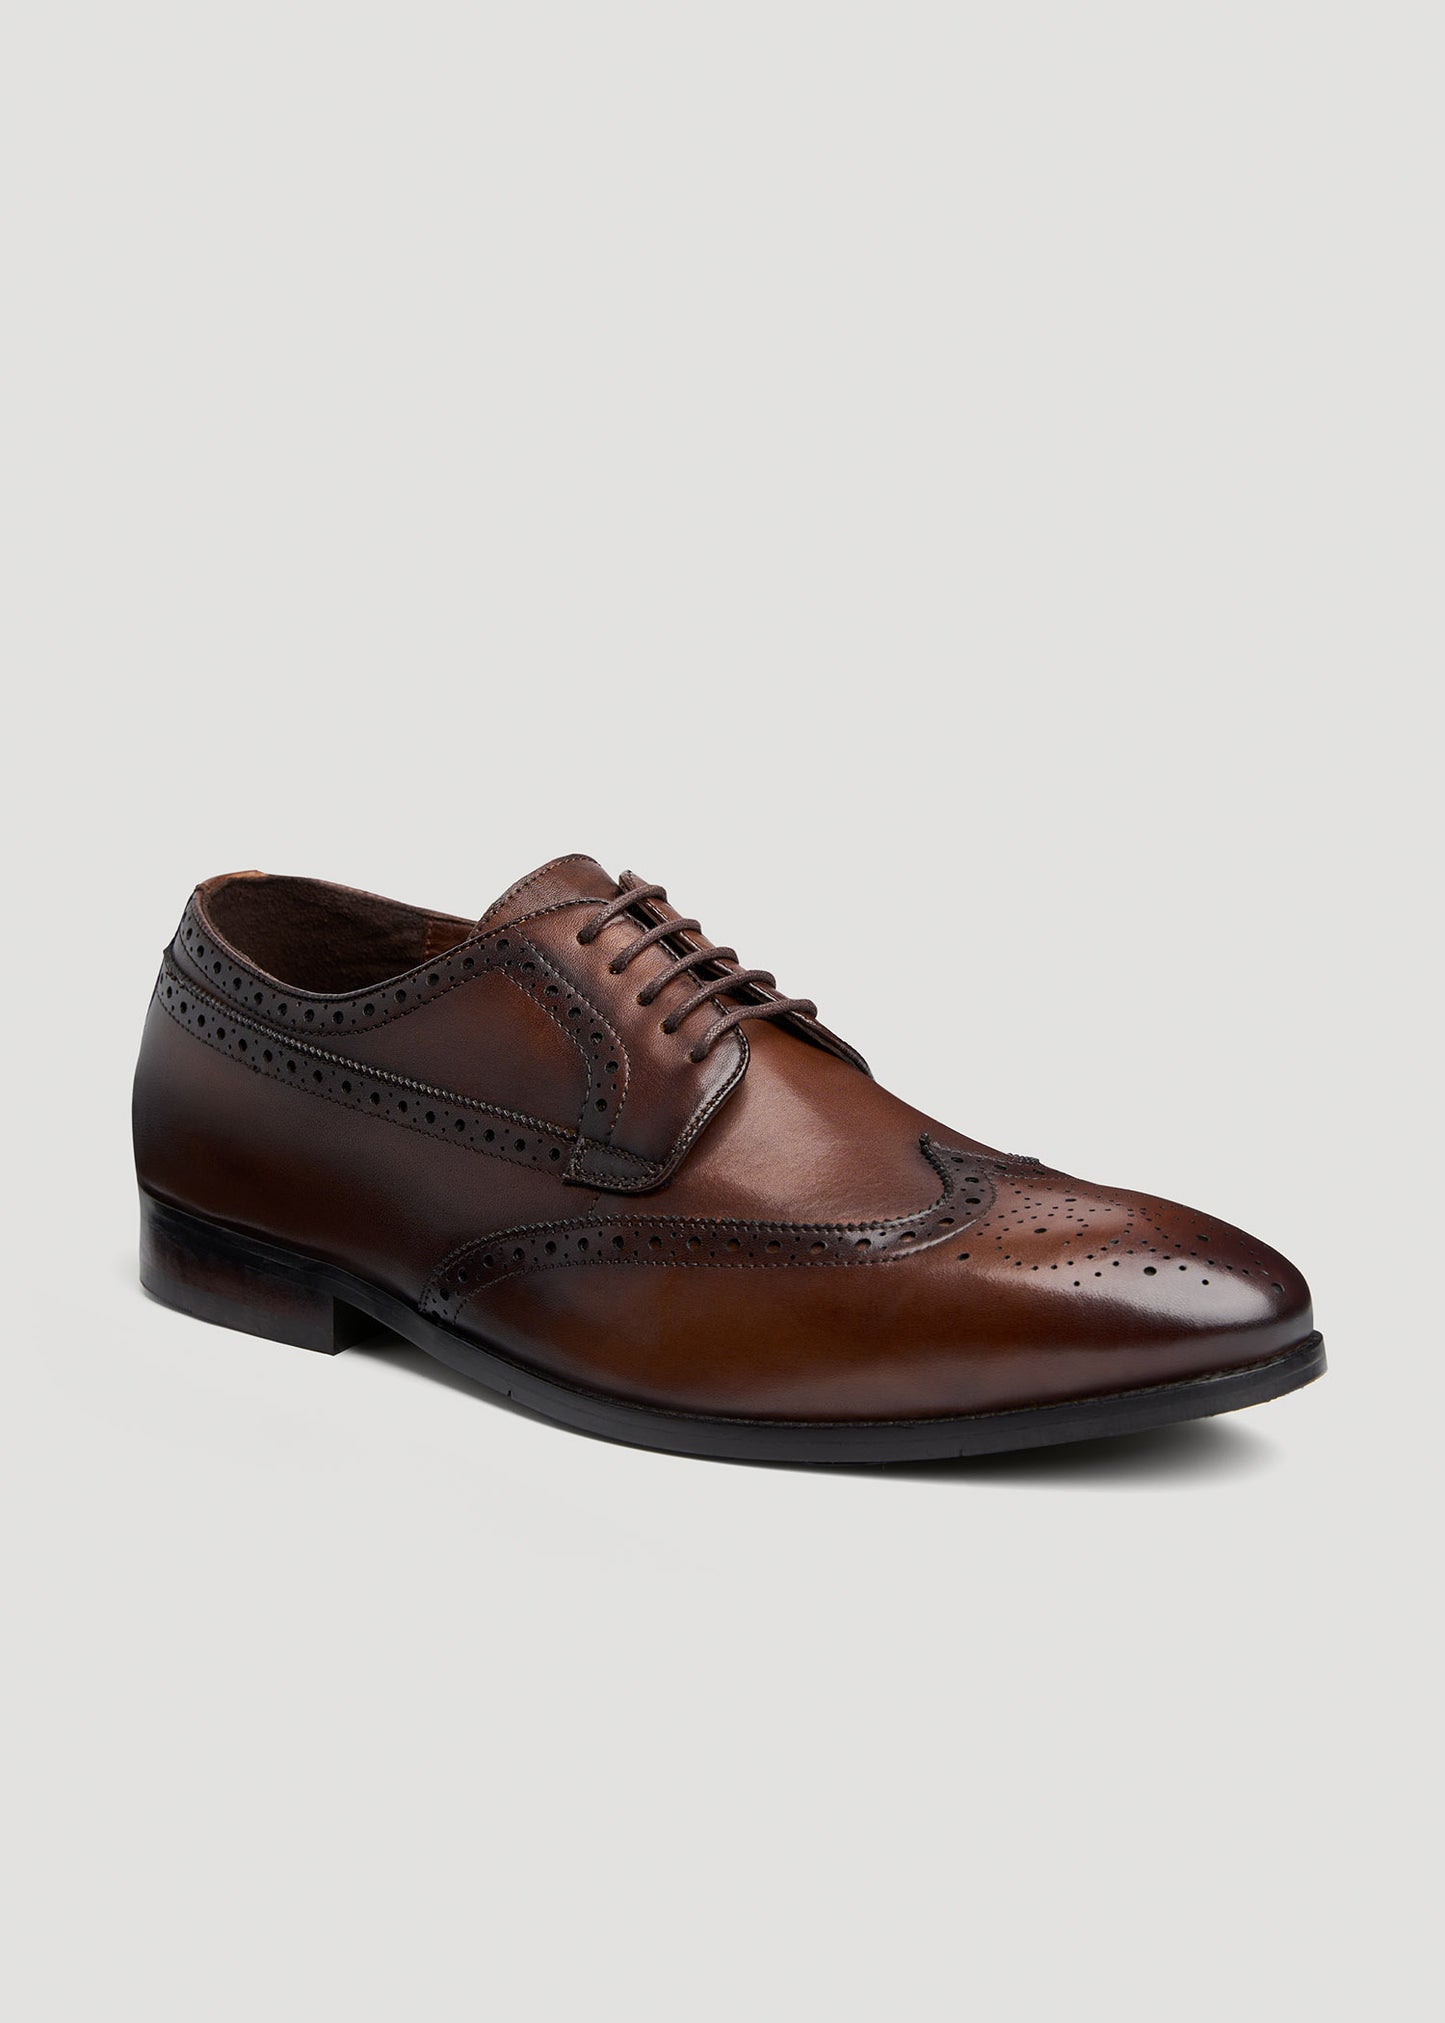    American-Tall-Men-Leather-Brogue-Oxford-Tan-Brown-front